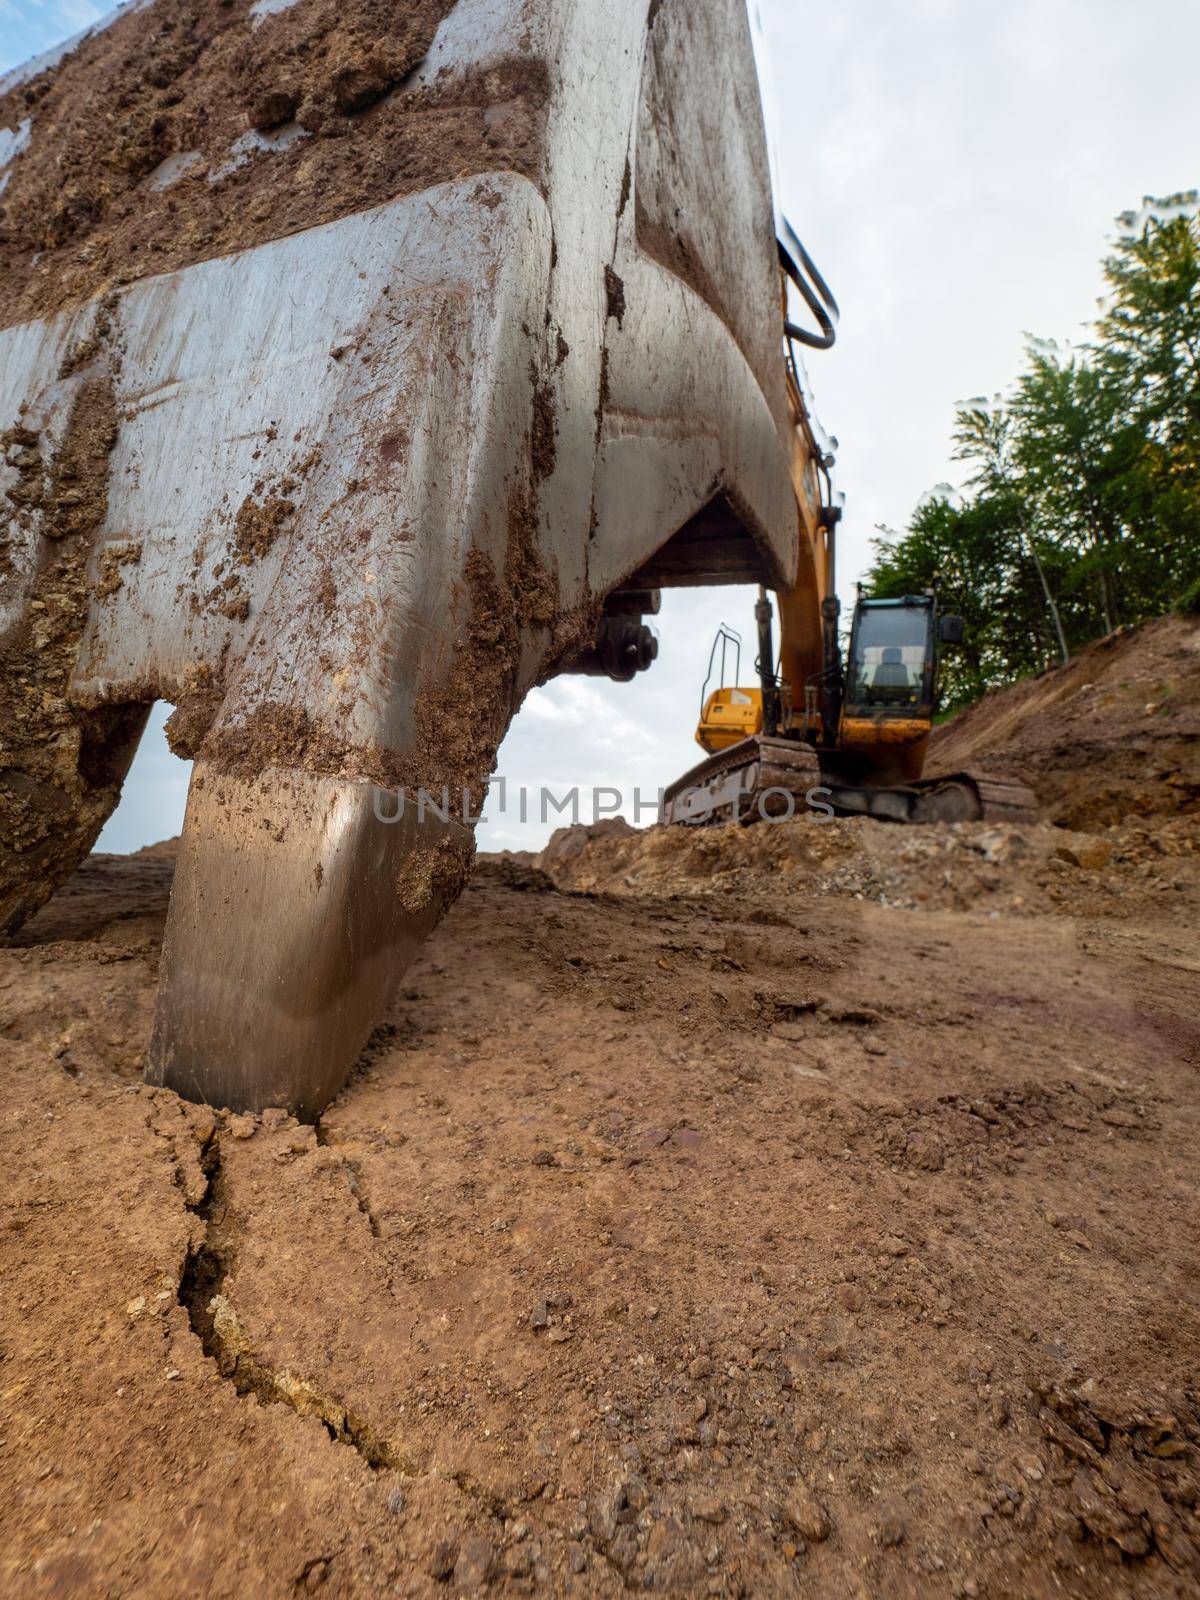 Industrial toothed digger bucket bite the ground, low angle view. Loader constraction excavator bucket close up.